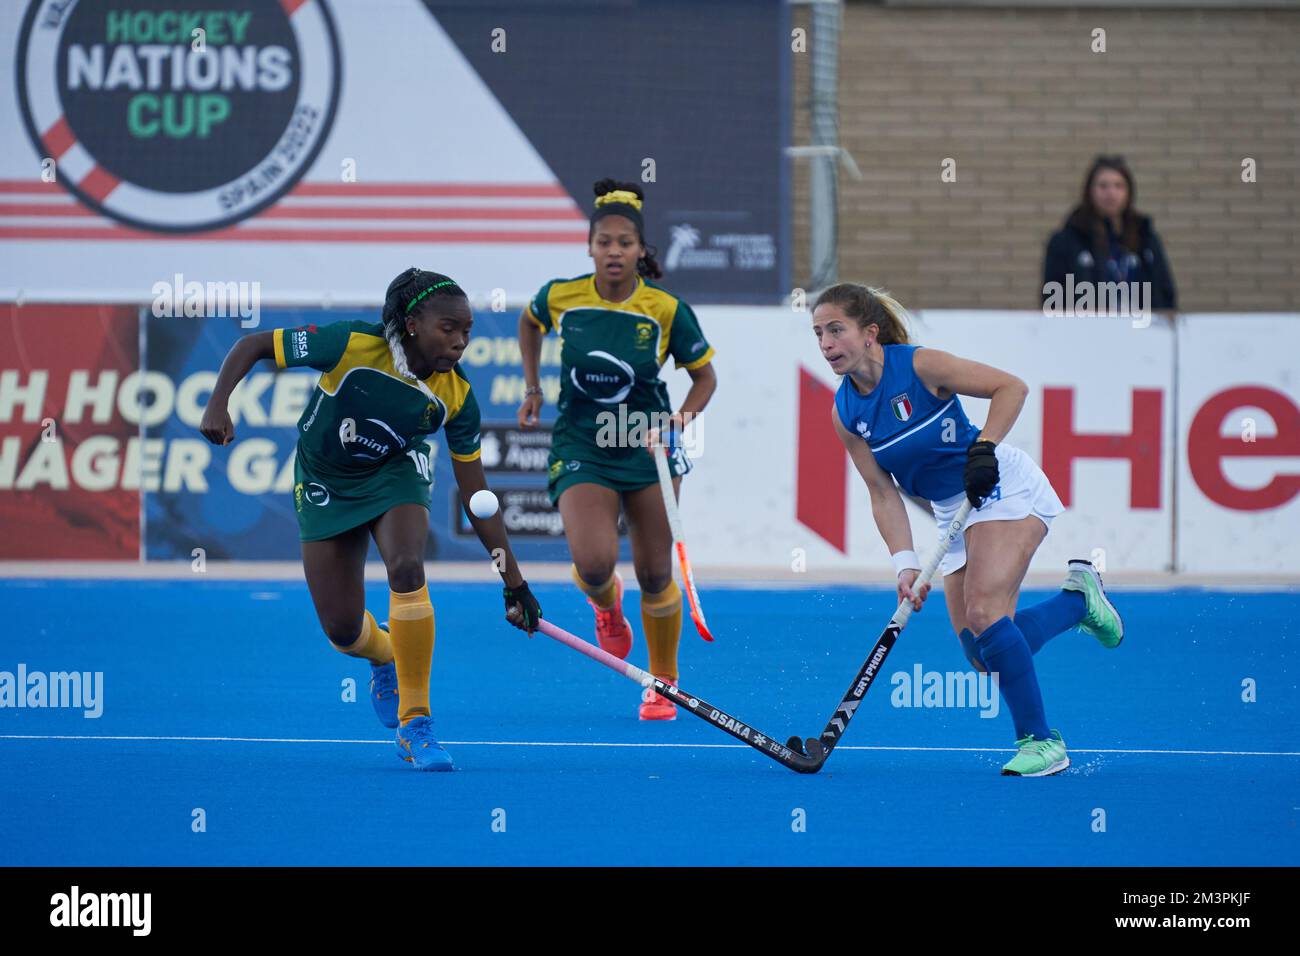 hockey nations cup 2022 live